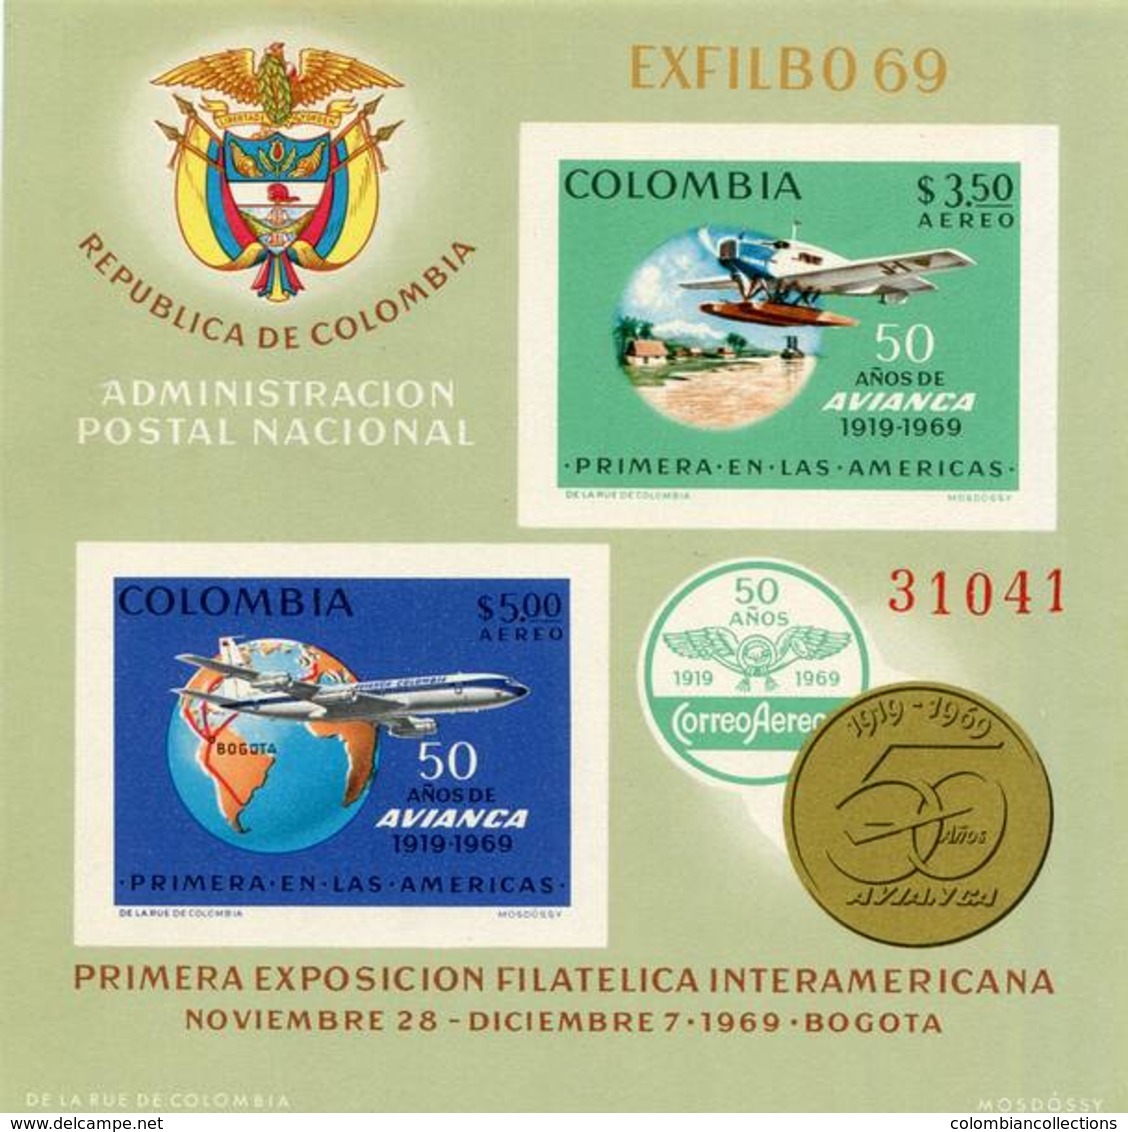 Lote HF31F, Colombia, 1969, HF, SS, 50 Años Del Primer Vuelo Postal, Airplane, Map, Expo, Hydroplane, Coat Of Arms - Kolumbien